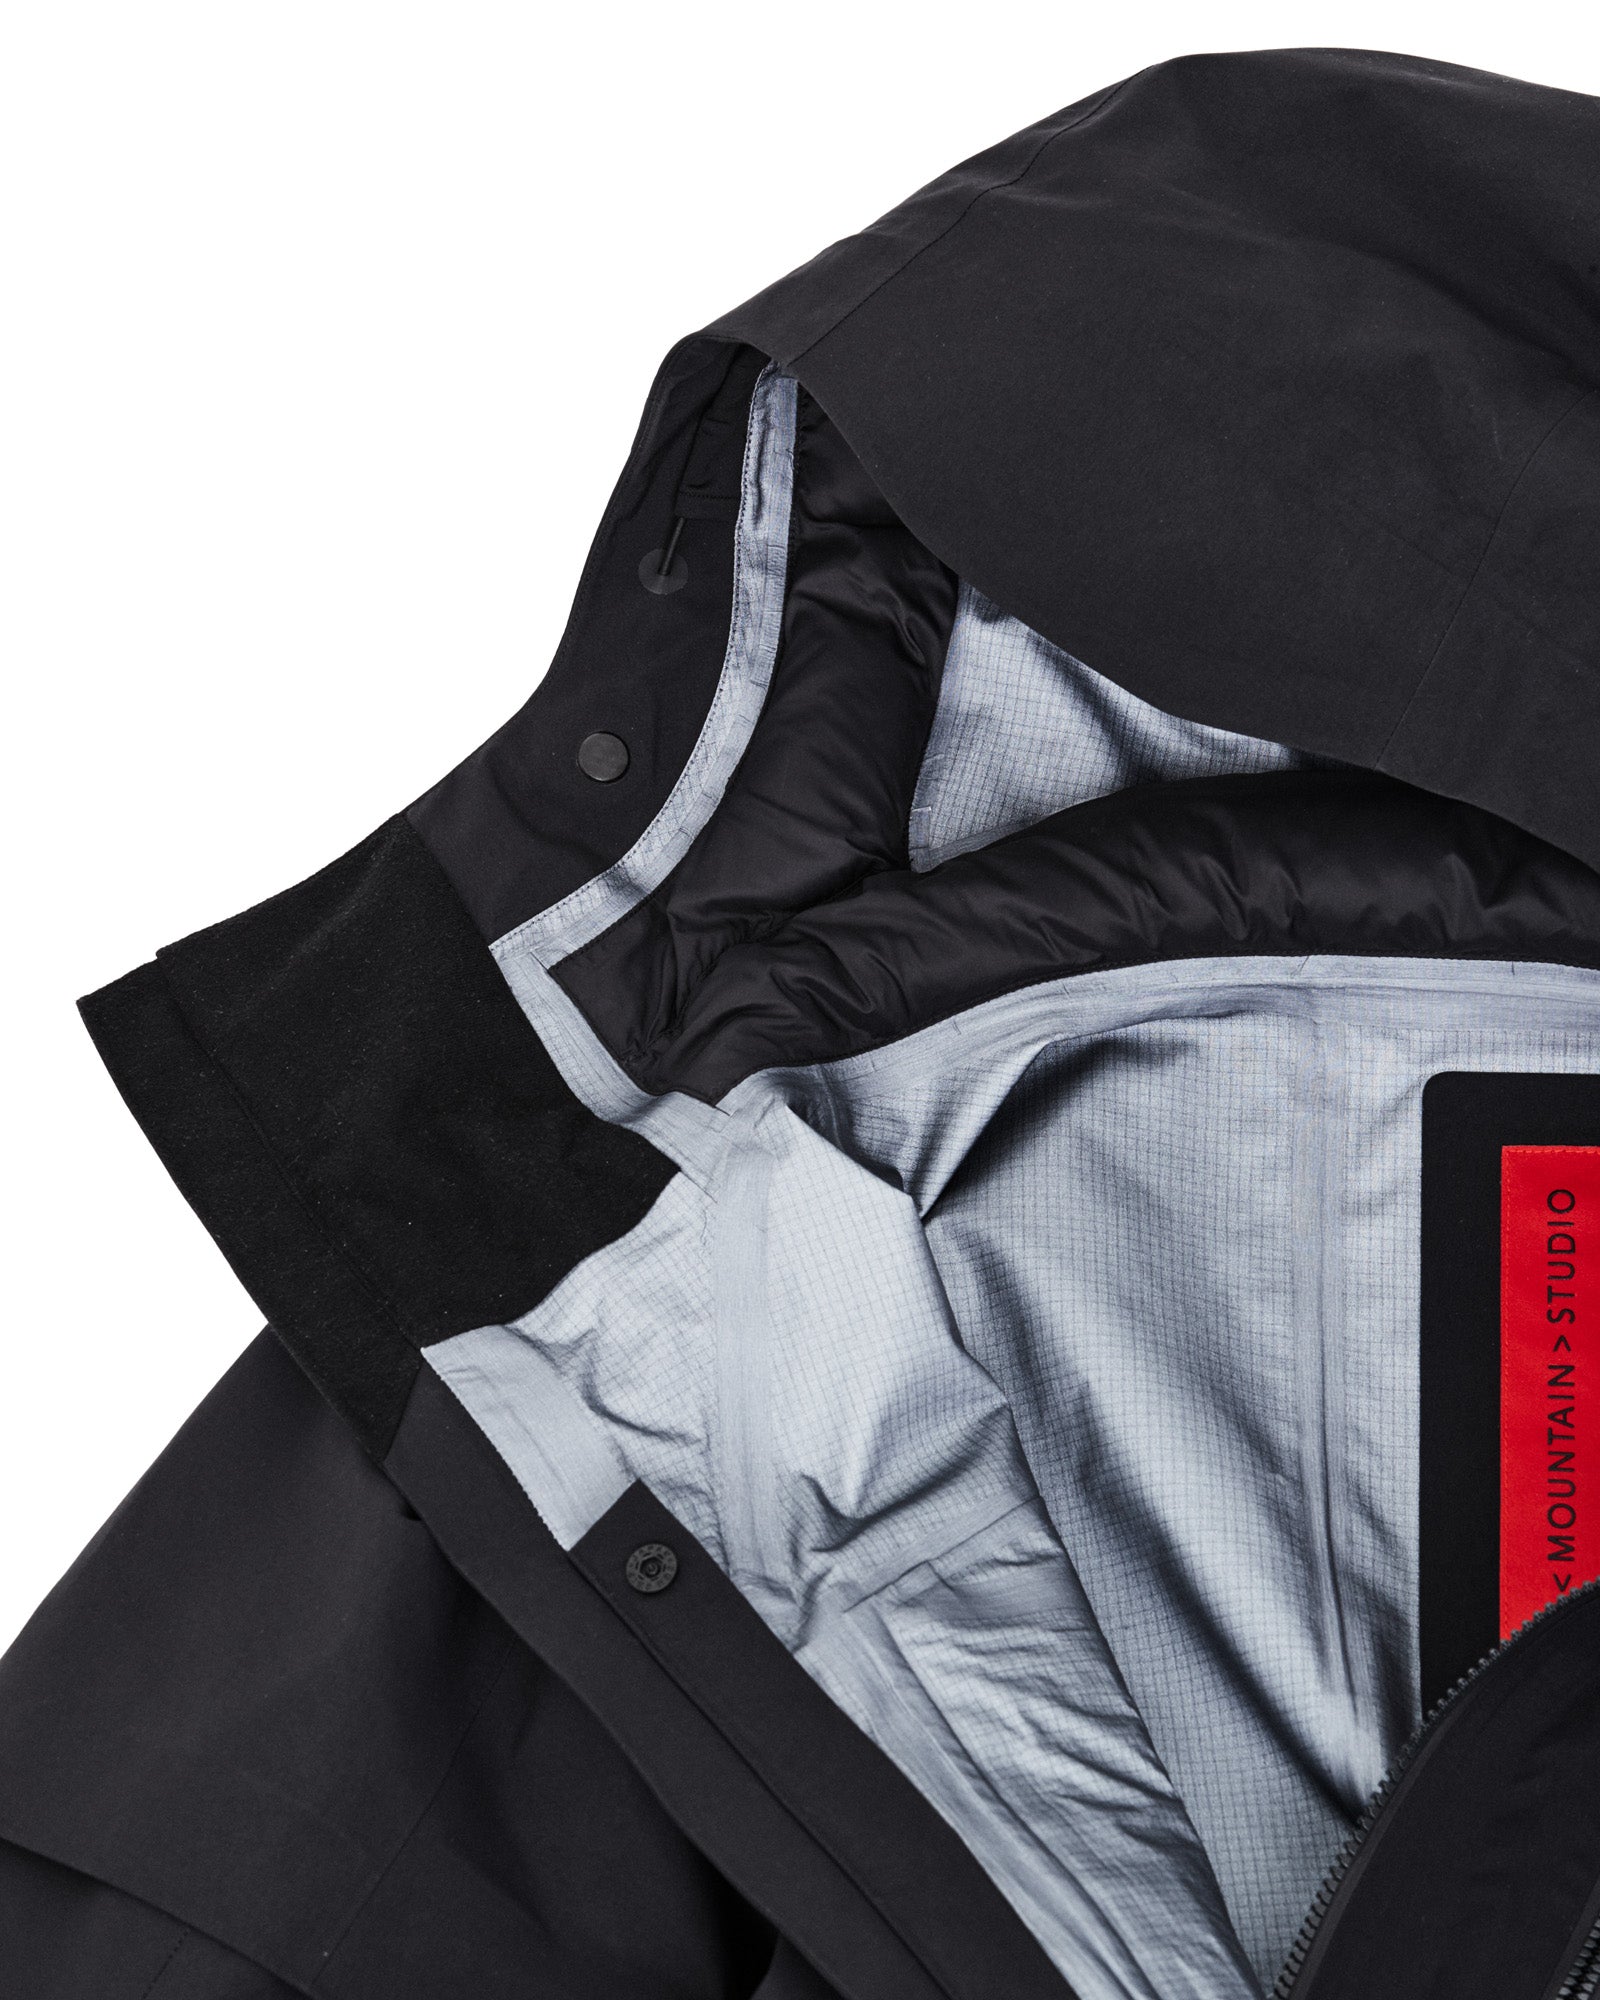 Our innovative Dupont Sorona® insulation barrier around neck, inside of hood and cuffs for extra warmth card image